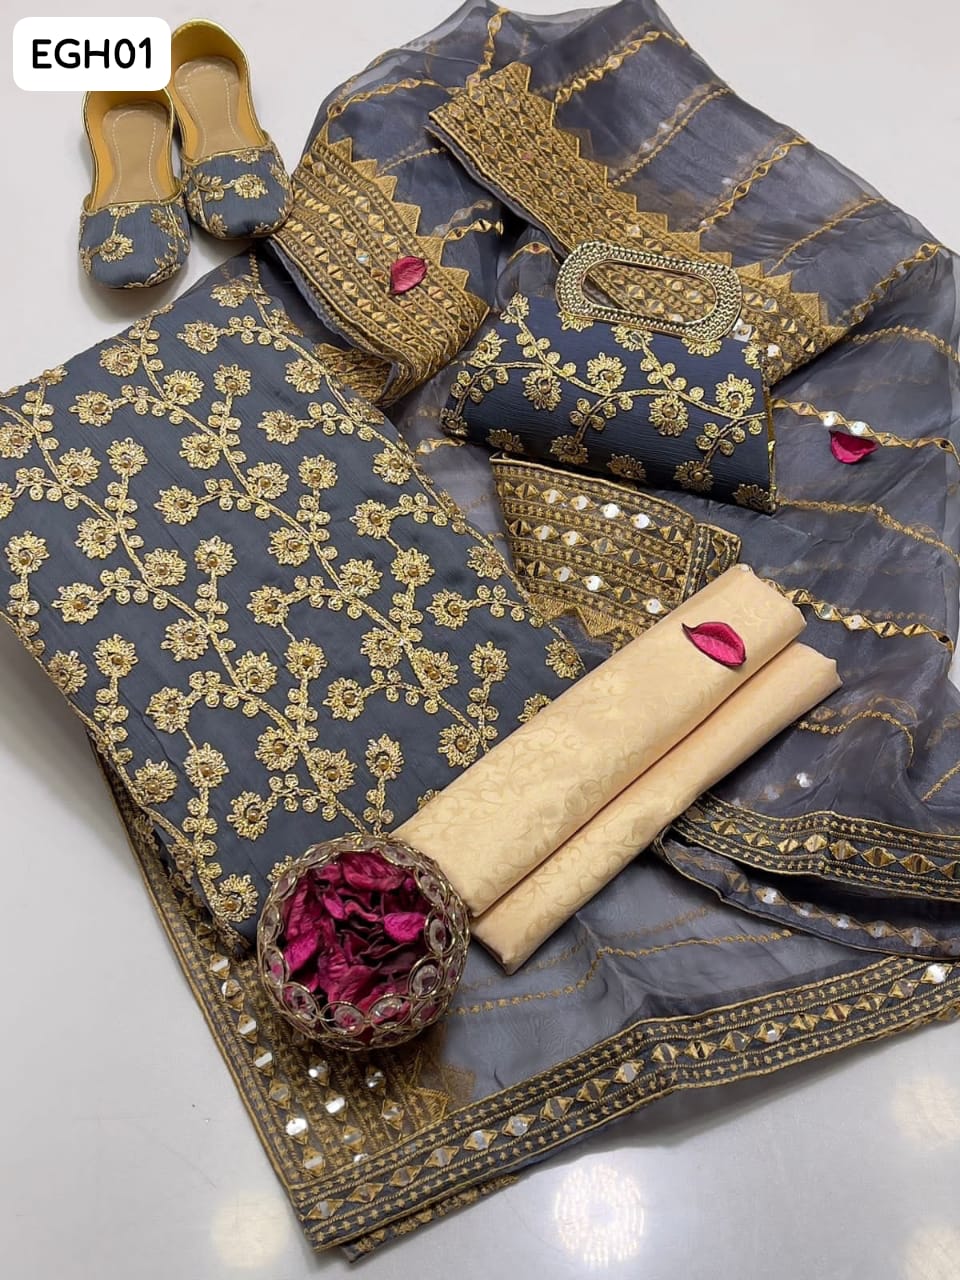 Crinkle Chiffon Fabric Marble And Gotta Embroidery Work Shirt With Tissue Organza Fabric 9Mm Panni Sheesha Embroidery With Heavy Pallu Embroidery Work Dupatta And Self Embossed Masuri Trouser 3Pc Dress With Matching Khussa & Matching Clutch As A Gift